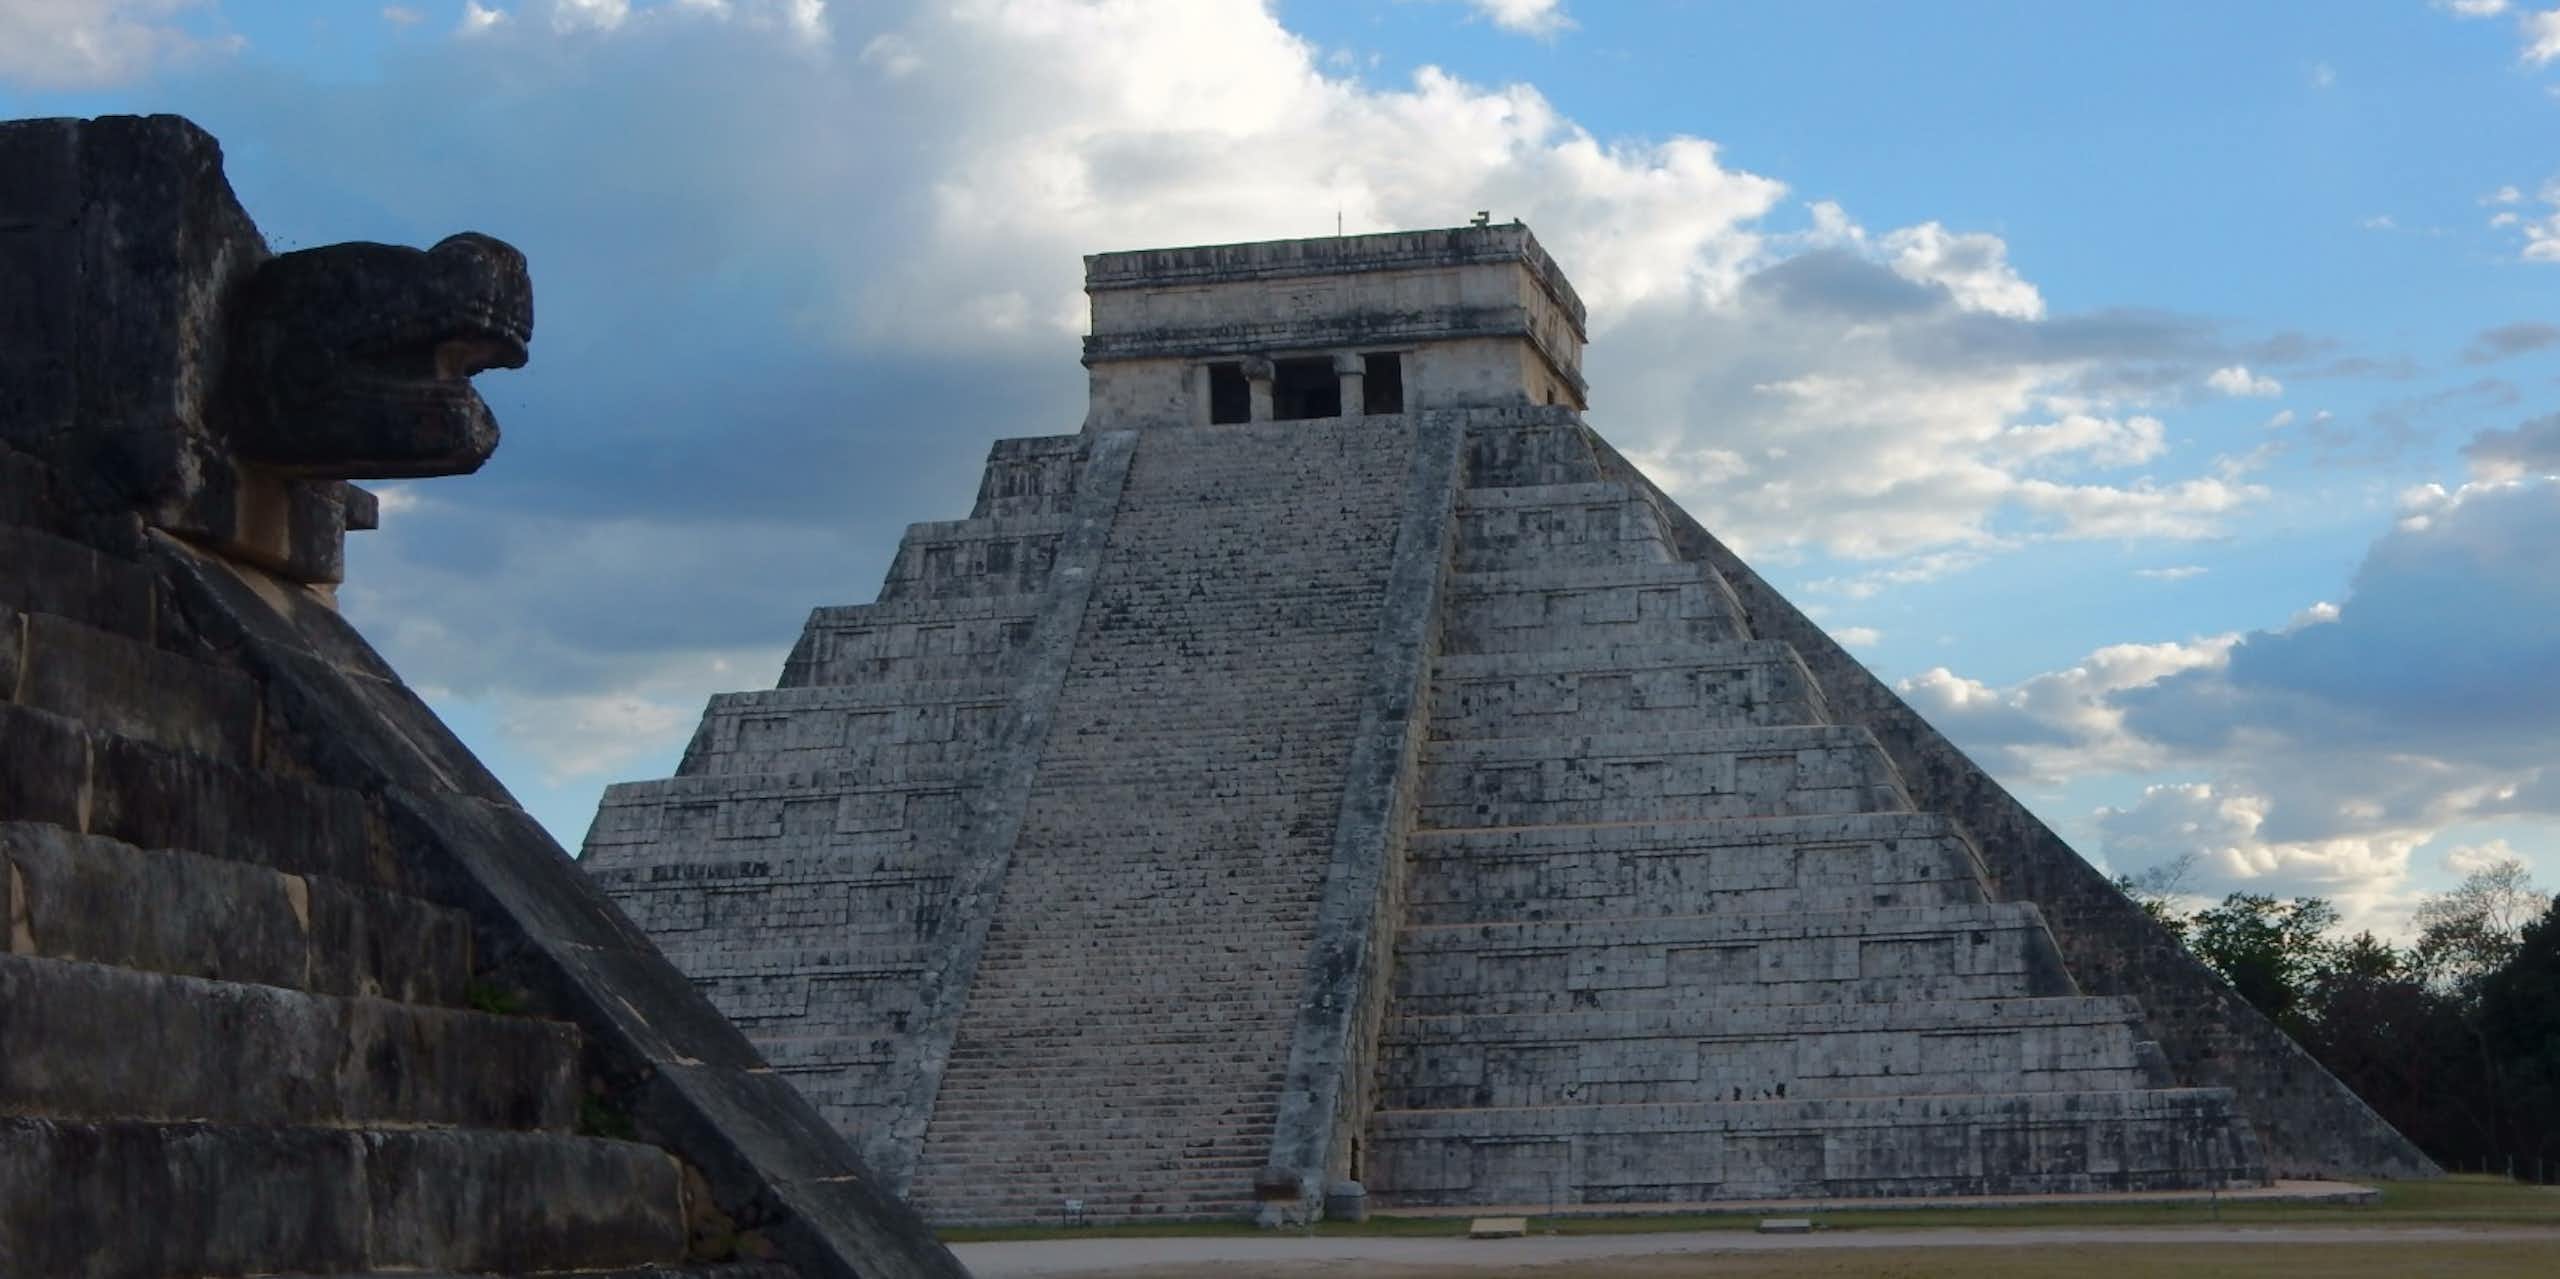 A low angle view of a pyramid with an angular top and large stairs leading up to it.